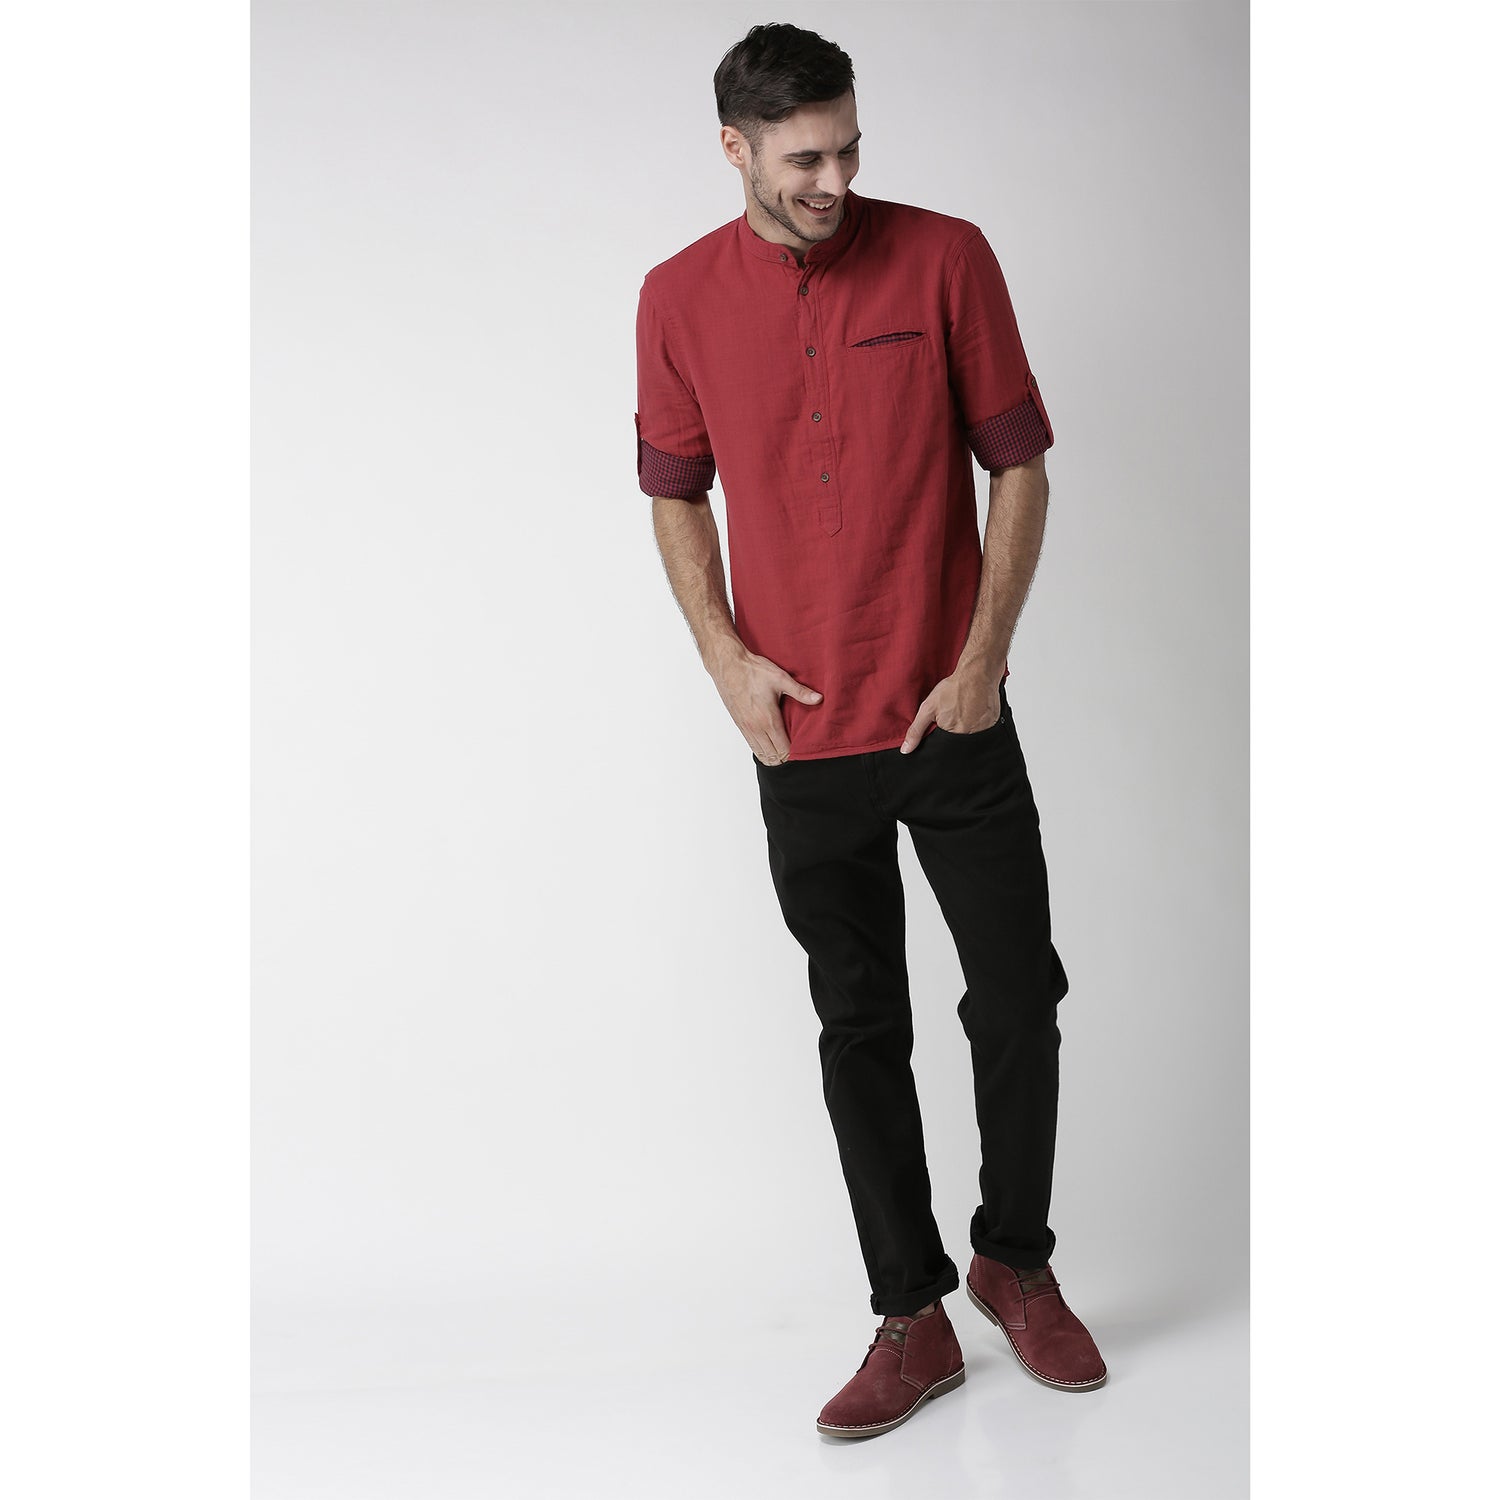 Men's Red Solid Casual Shirts (MADUO)